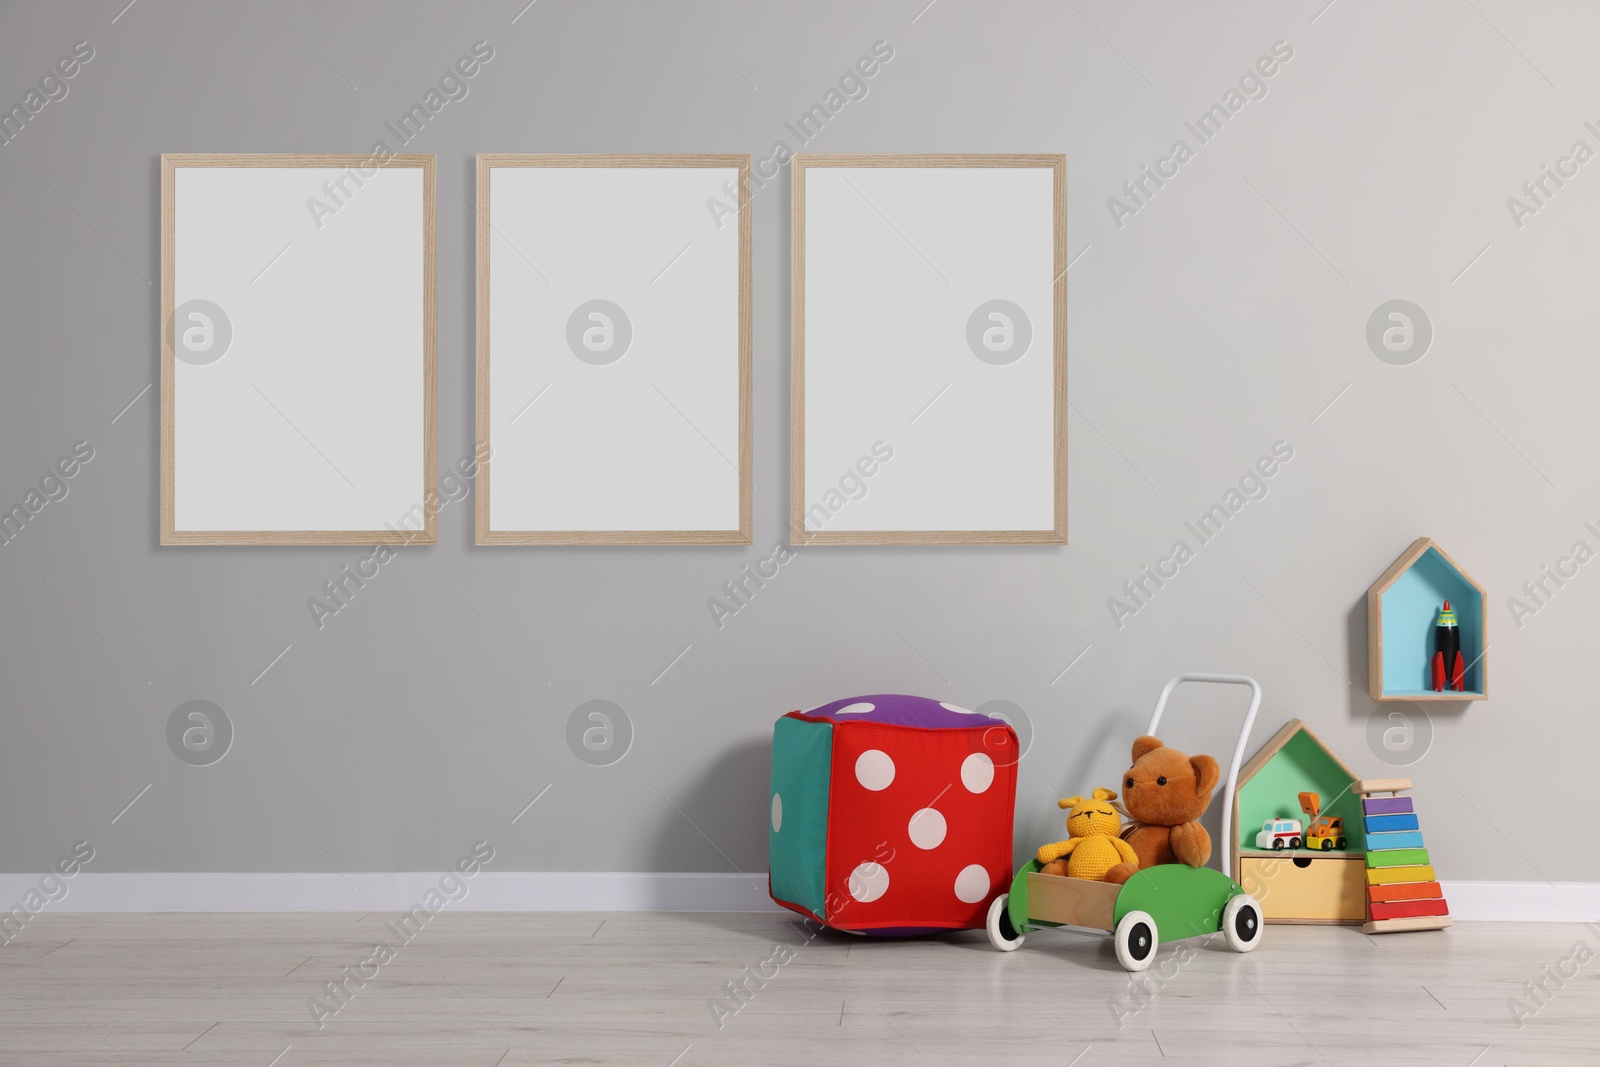 Image of Room for child with blank pictures on grey wall. Interior design